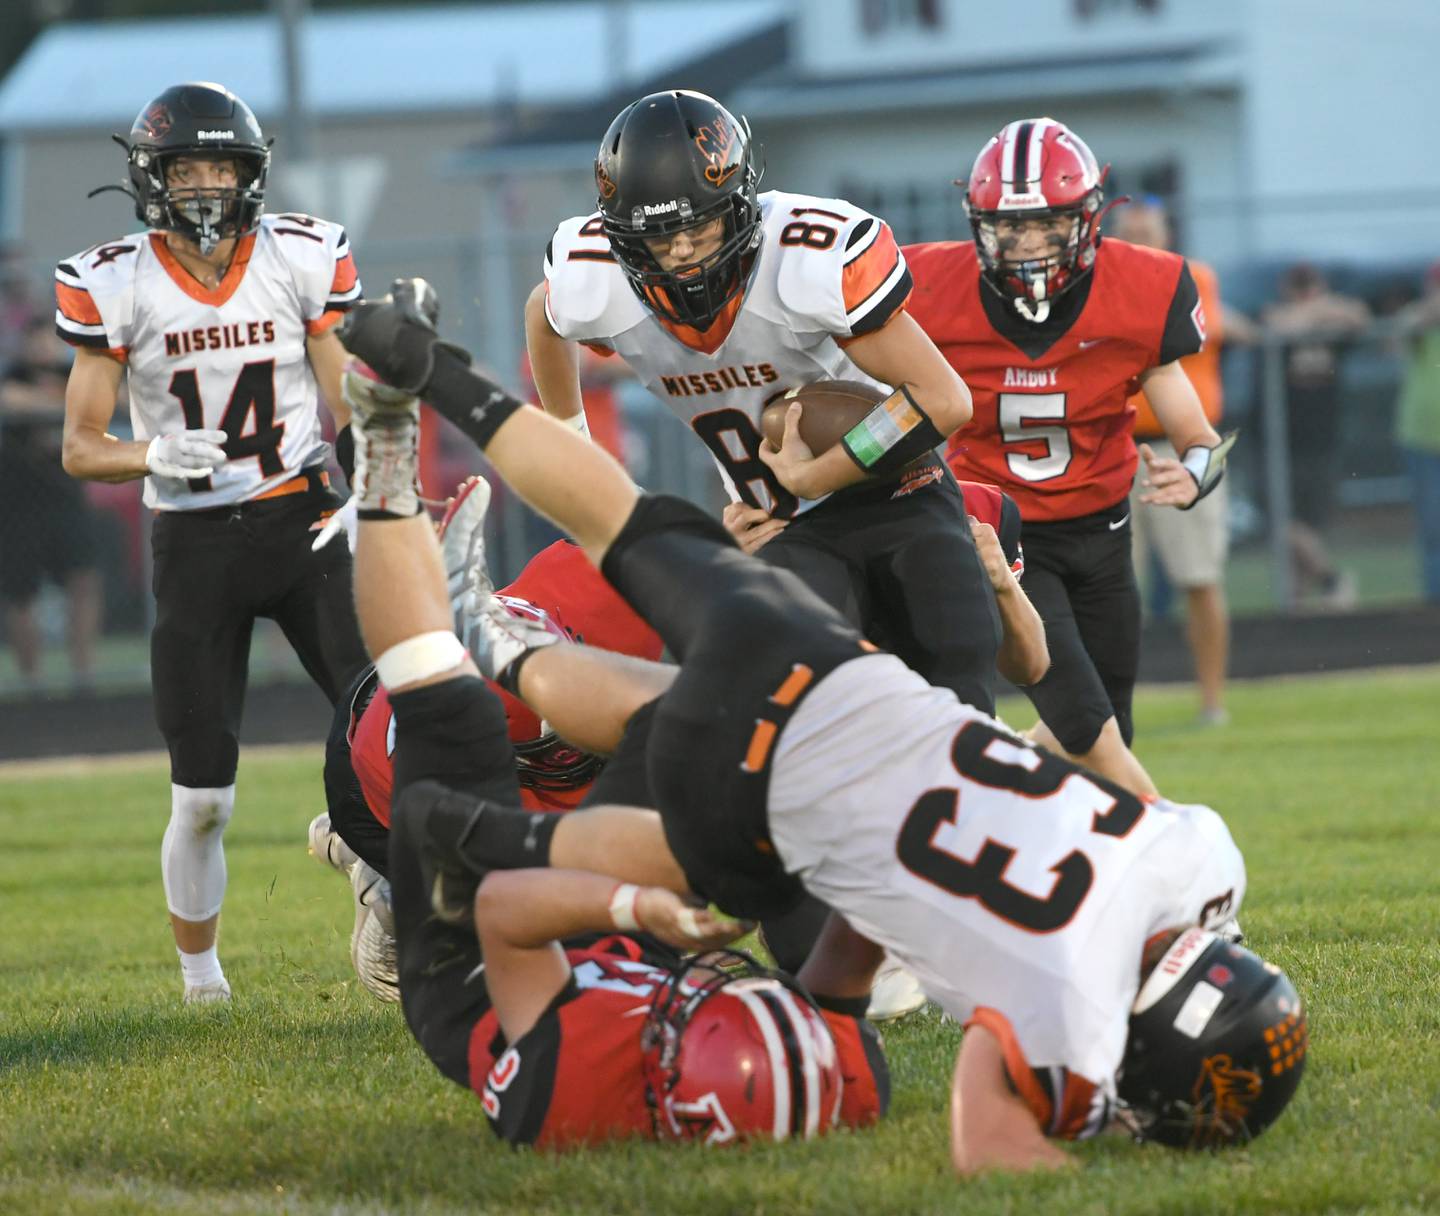 Milledgville's Konnor Johnson runs with the ball as Eric Ebersole (63) blocks against Amboy on Friday. Sept. 9.